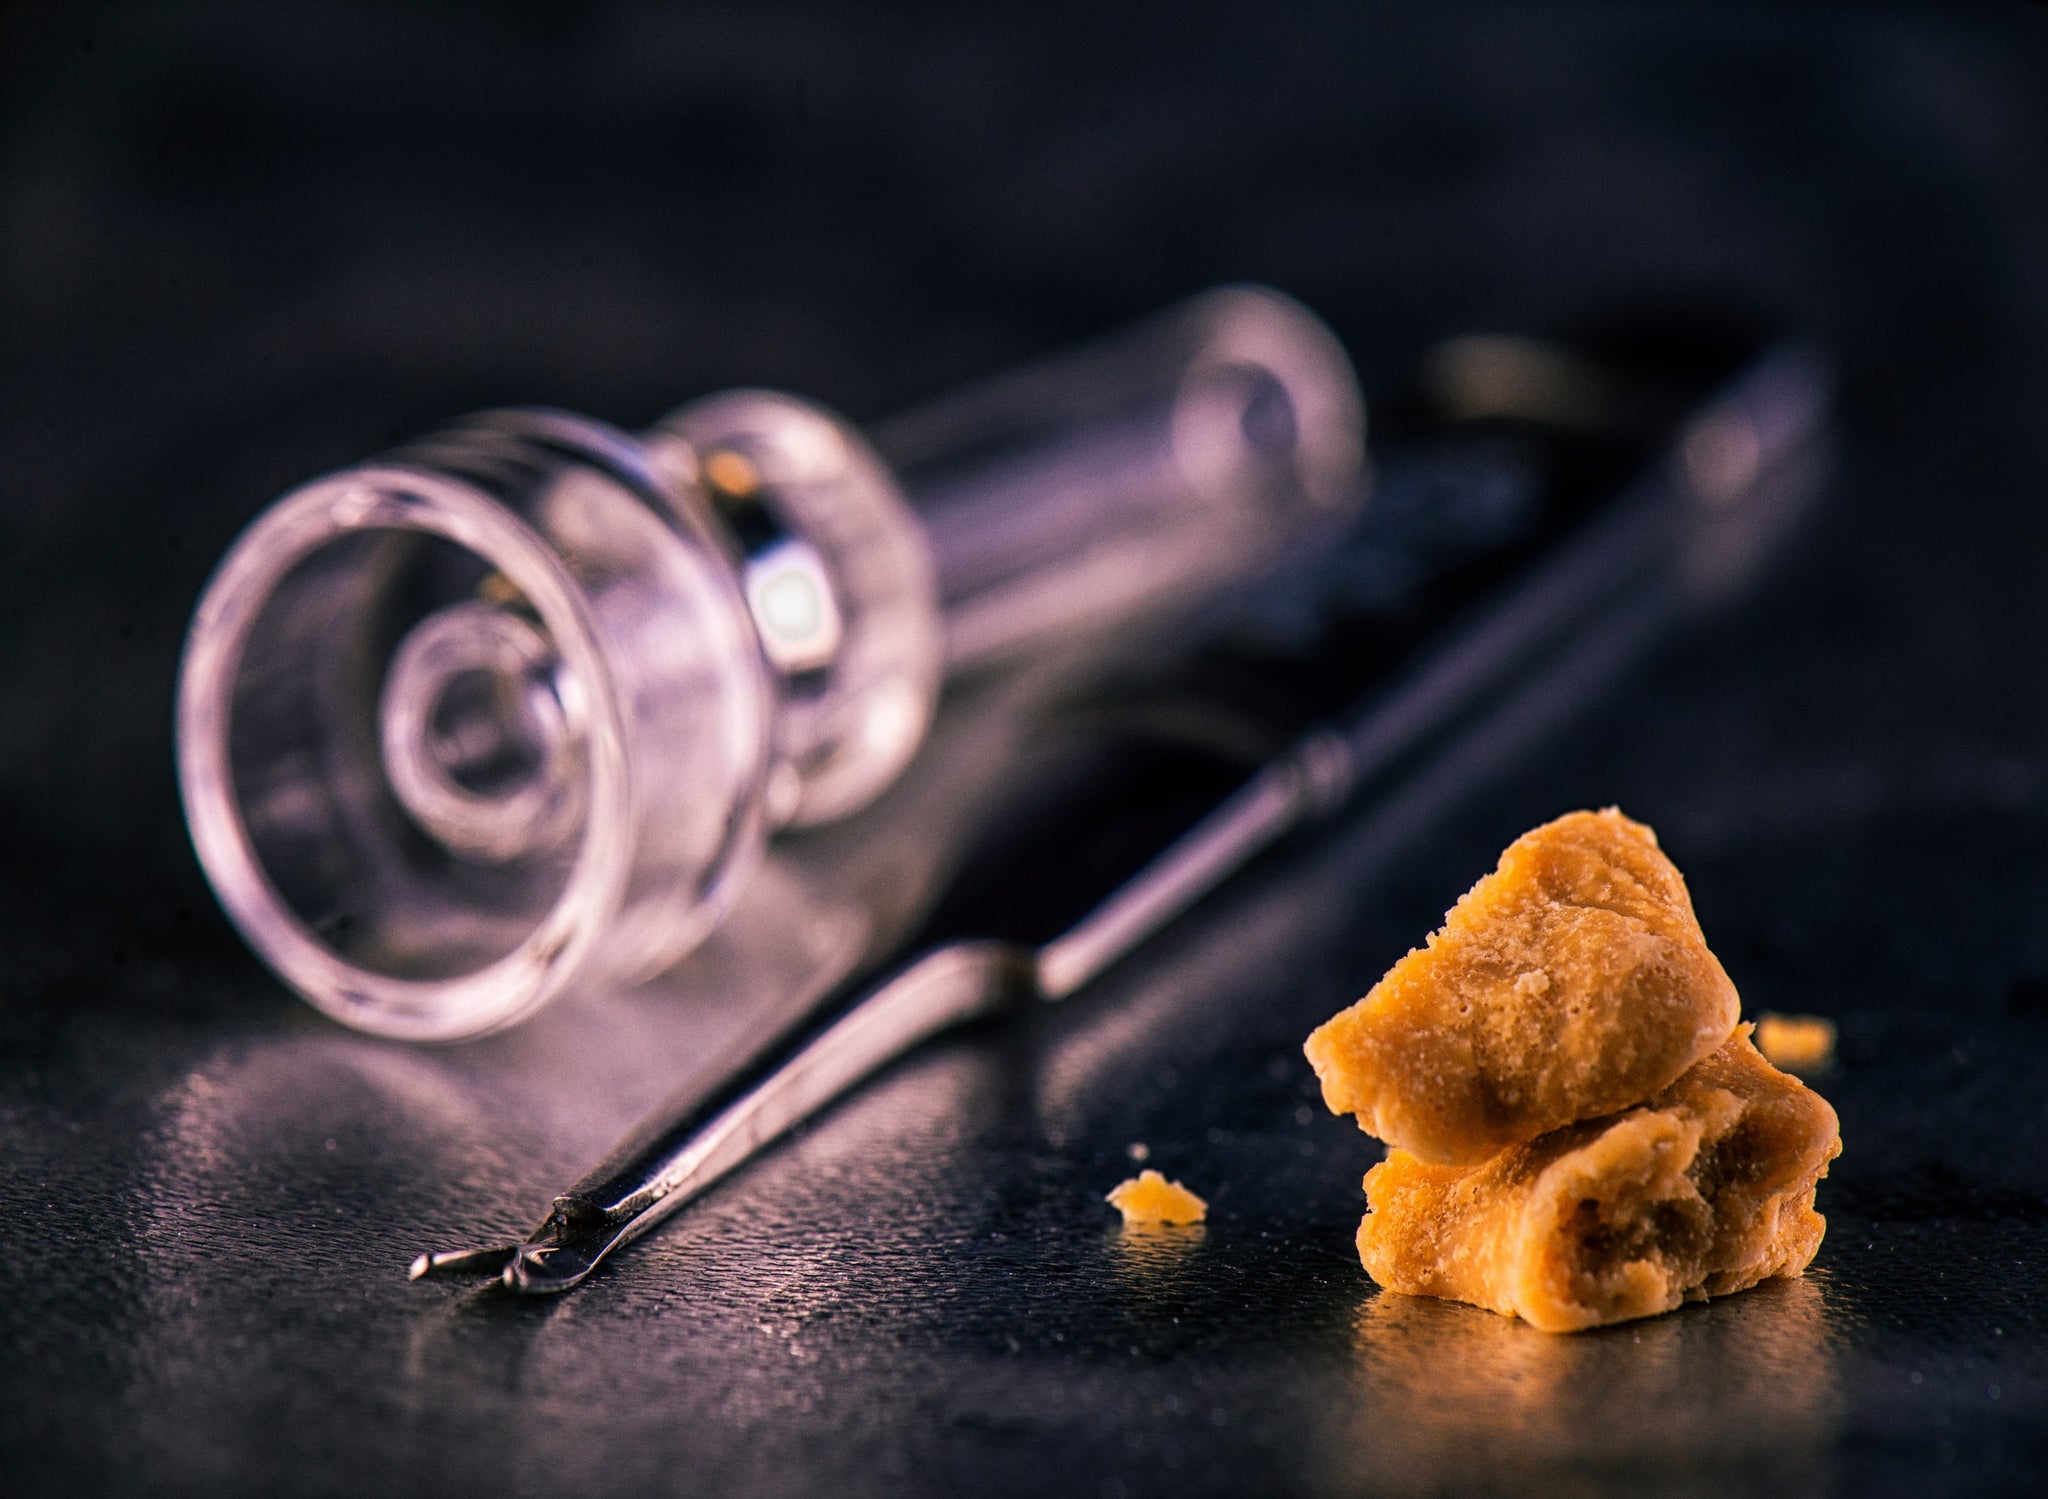 The ultimate guide to globbing: how to take big dabs